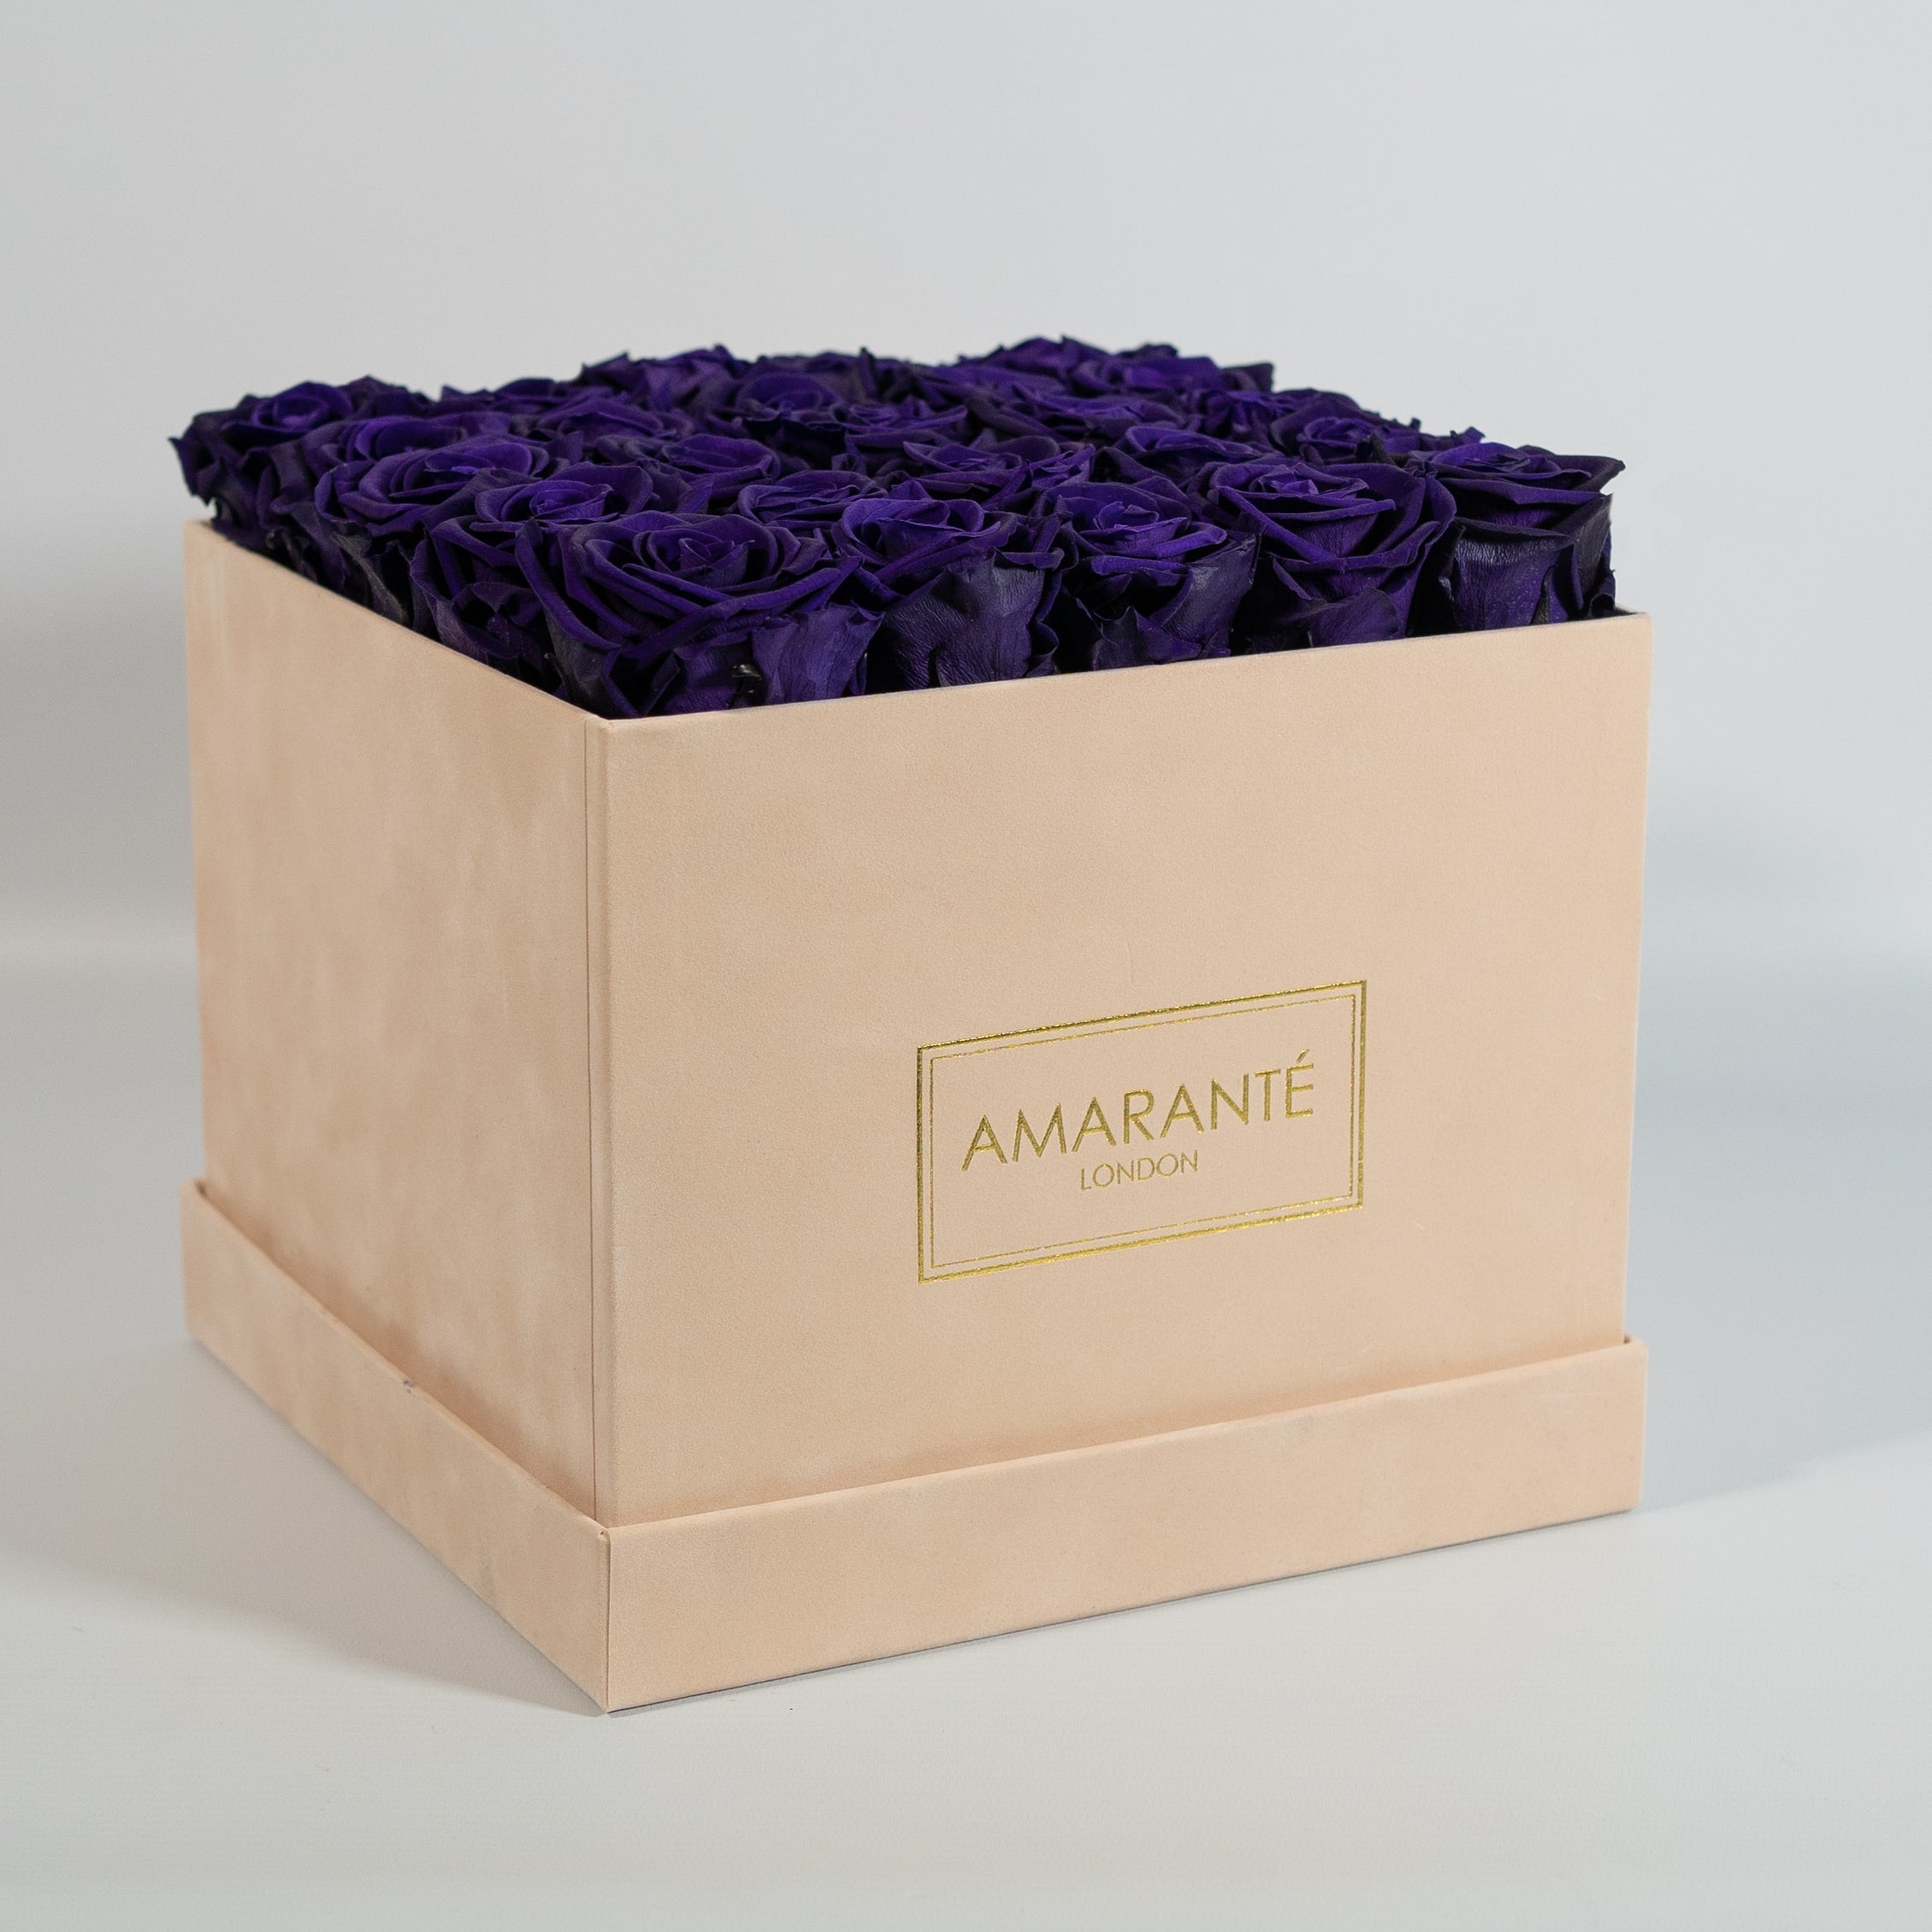 Luxurious Royal purple Roses Entrenched  in a dreamy beige box.